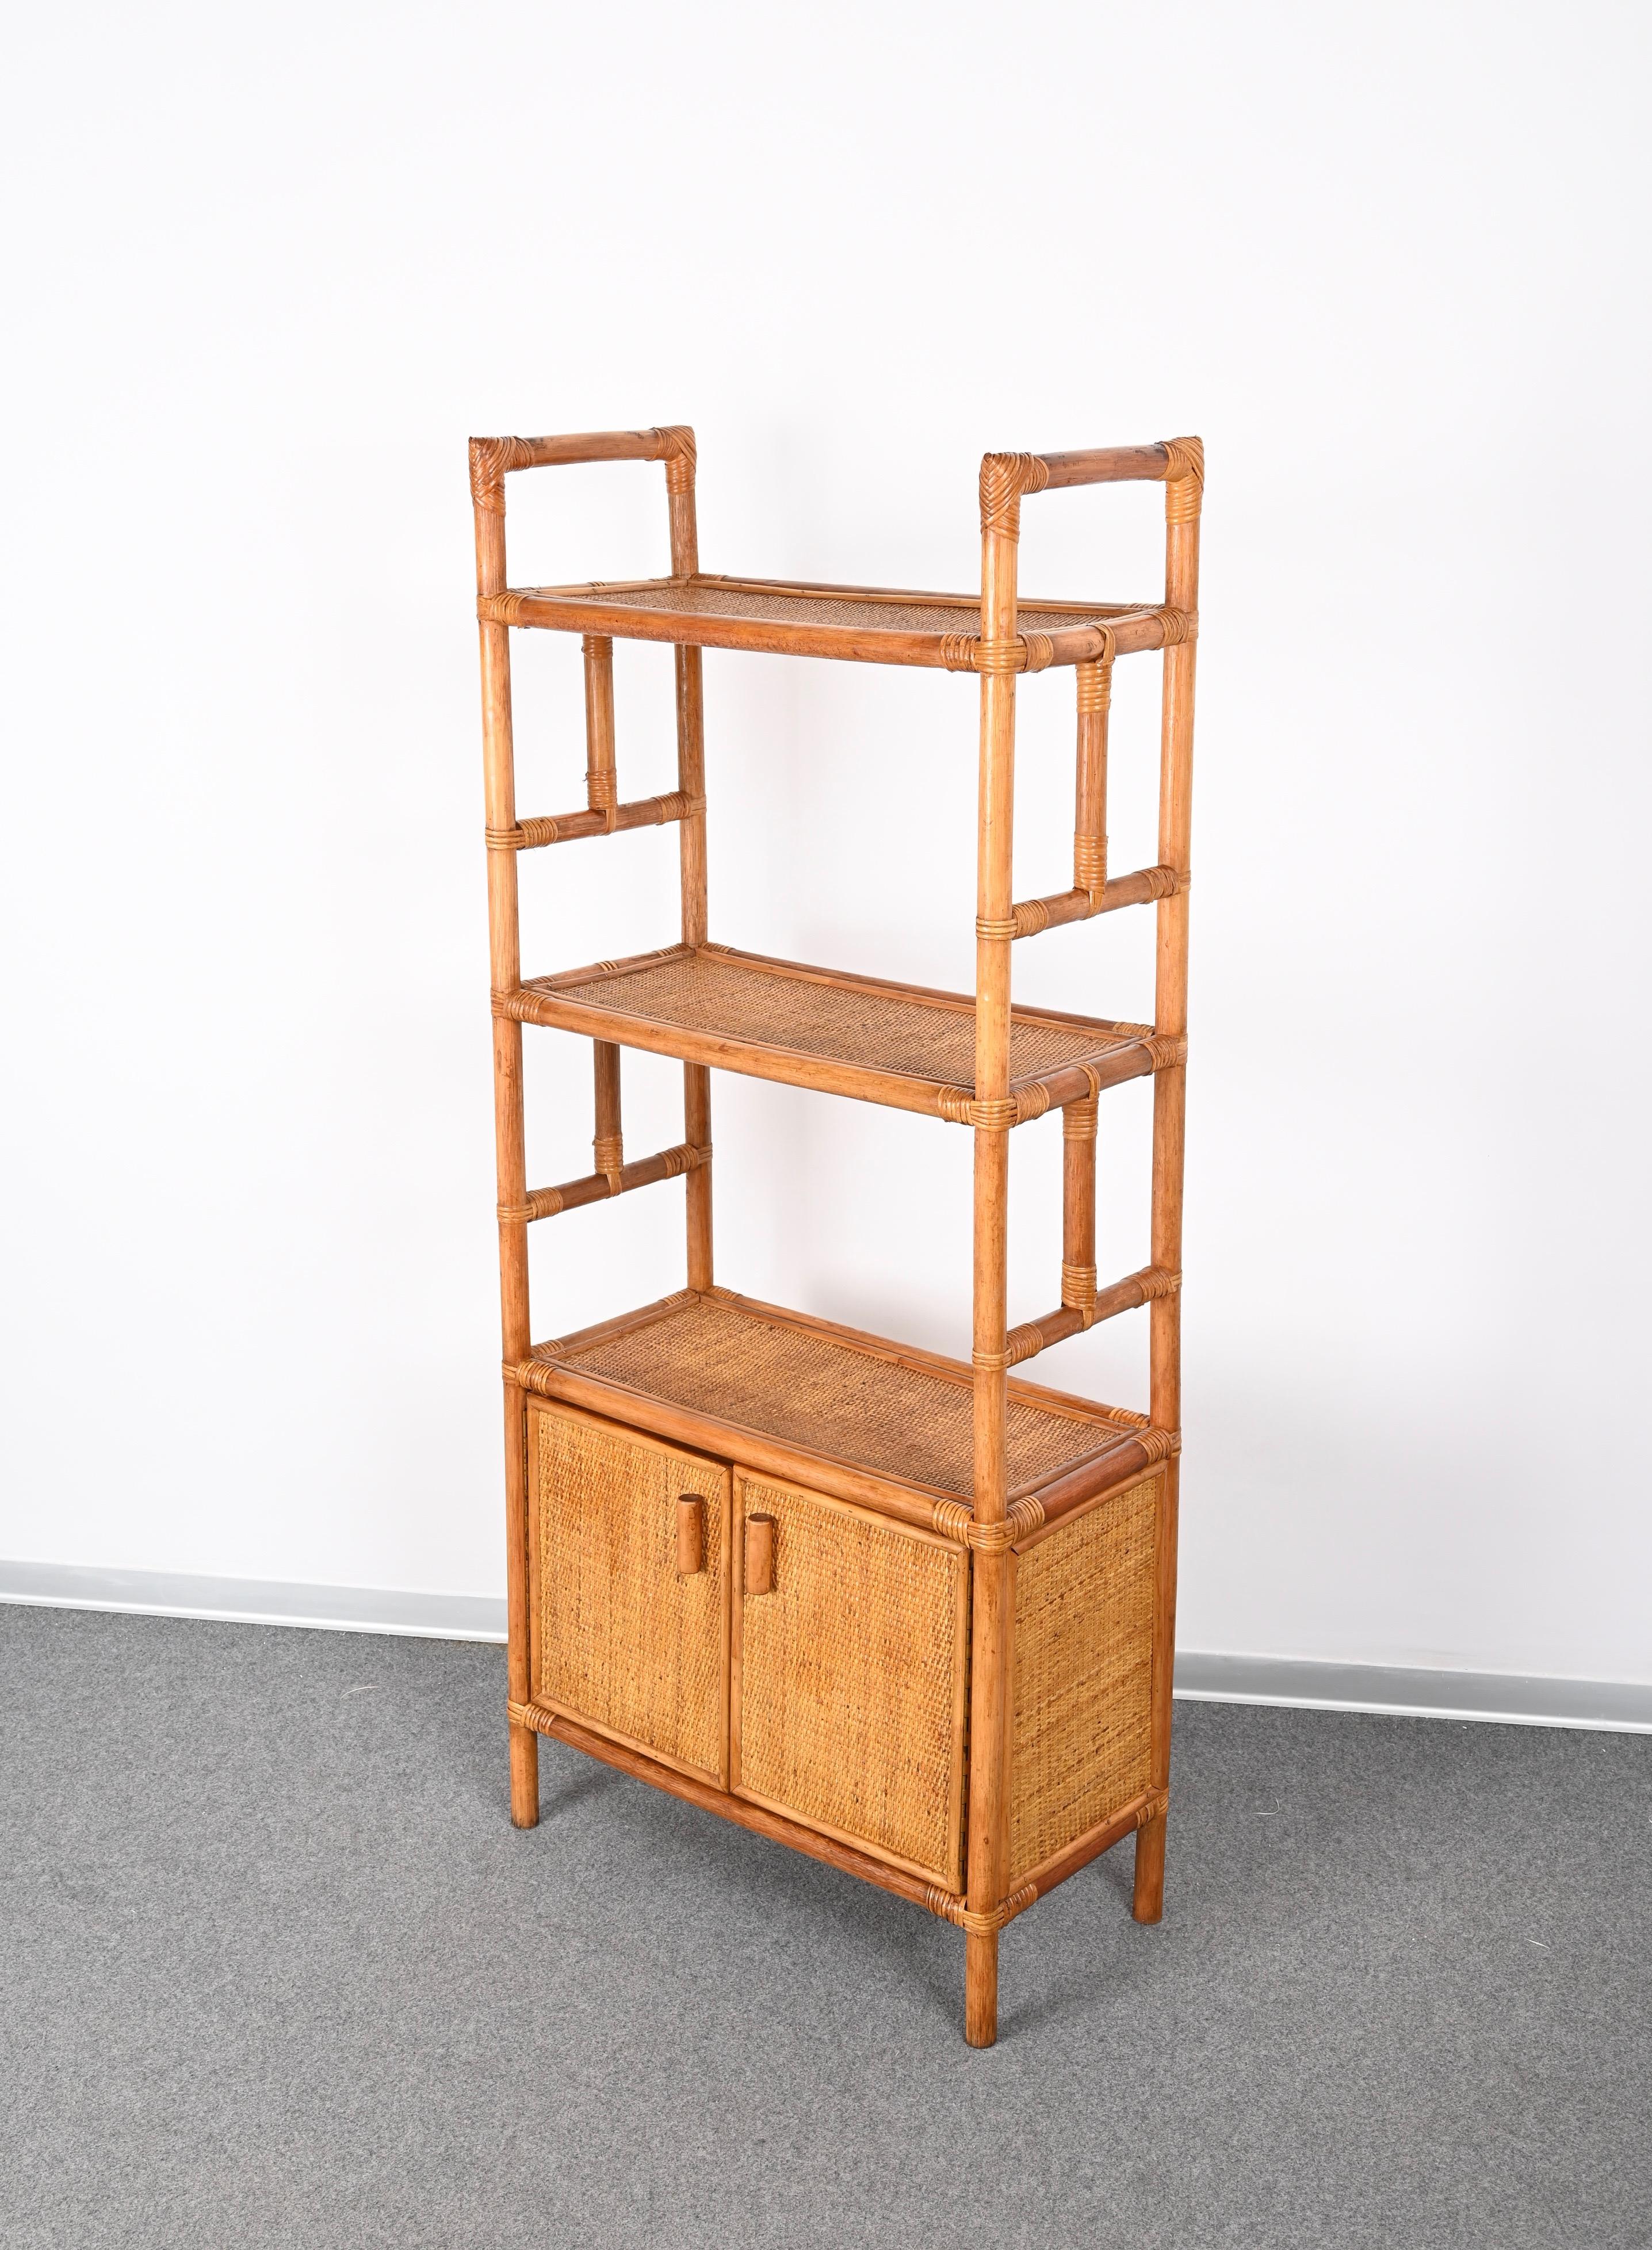 20th Century Midcentury Italian Modern Rattan and Bamboo Bookcase with Doors, 1970s